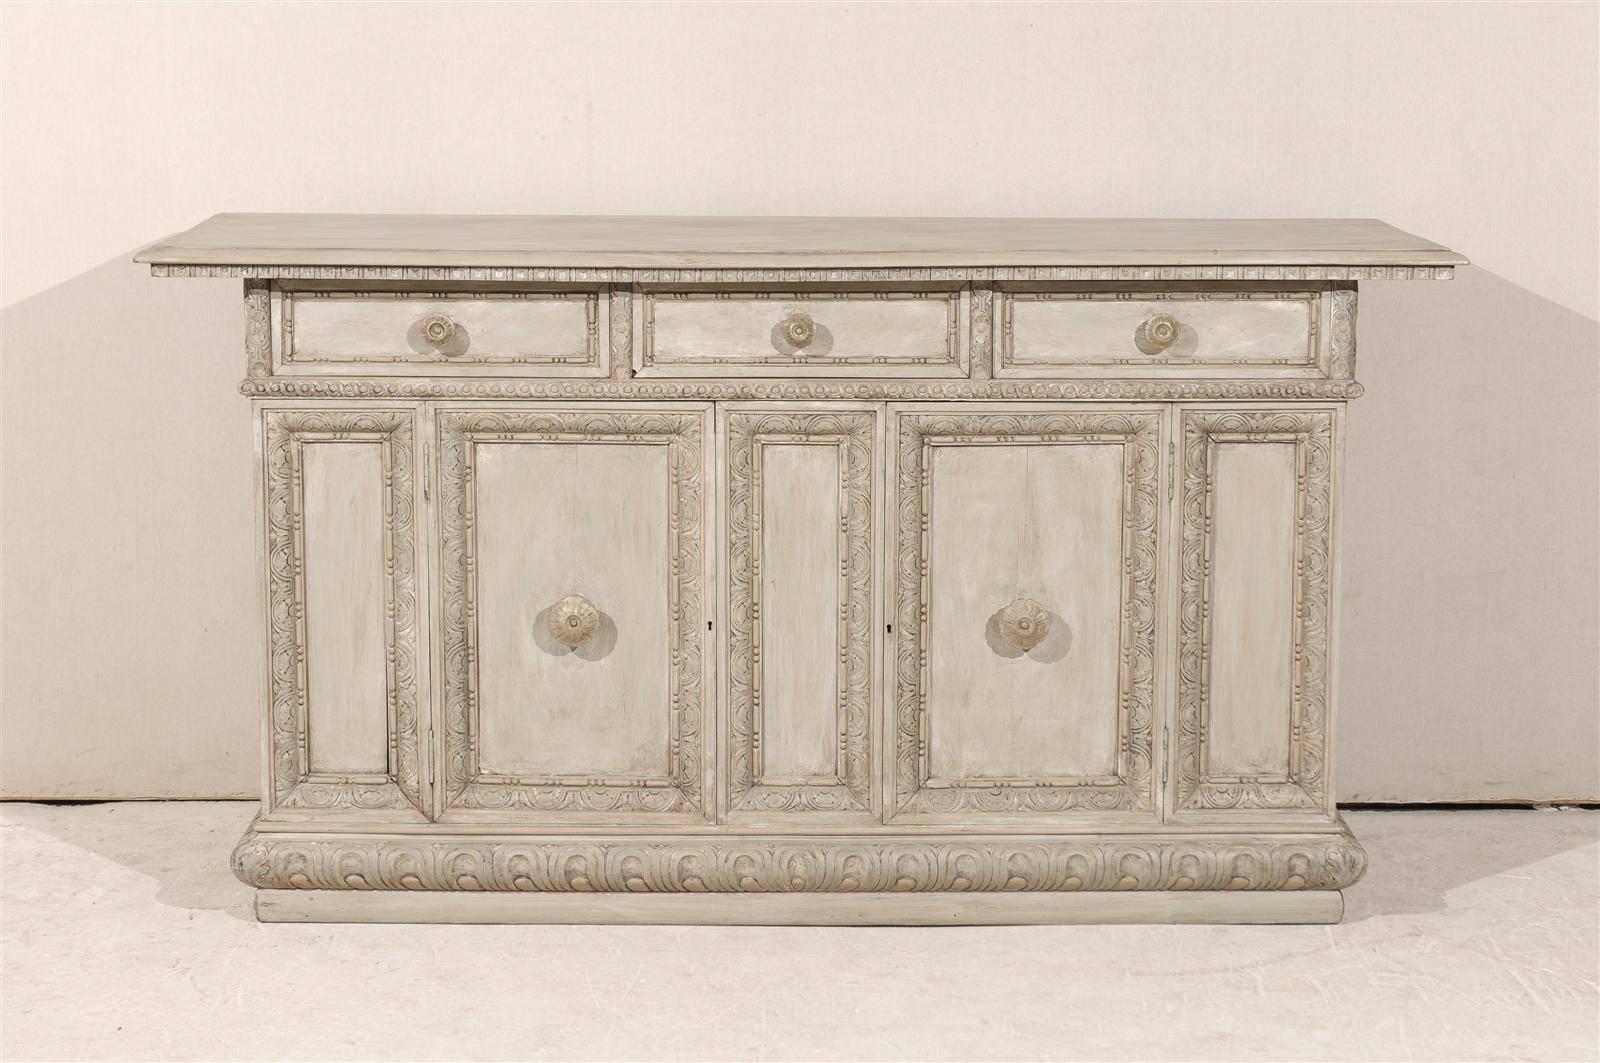 An Italian 19th century painted wood buffet / credenza with two doors, three drawers, beautifully carved details including guilloche frieze and dovetailed joints.